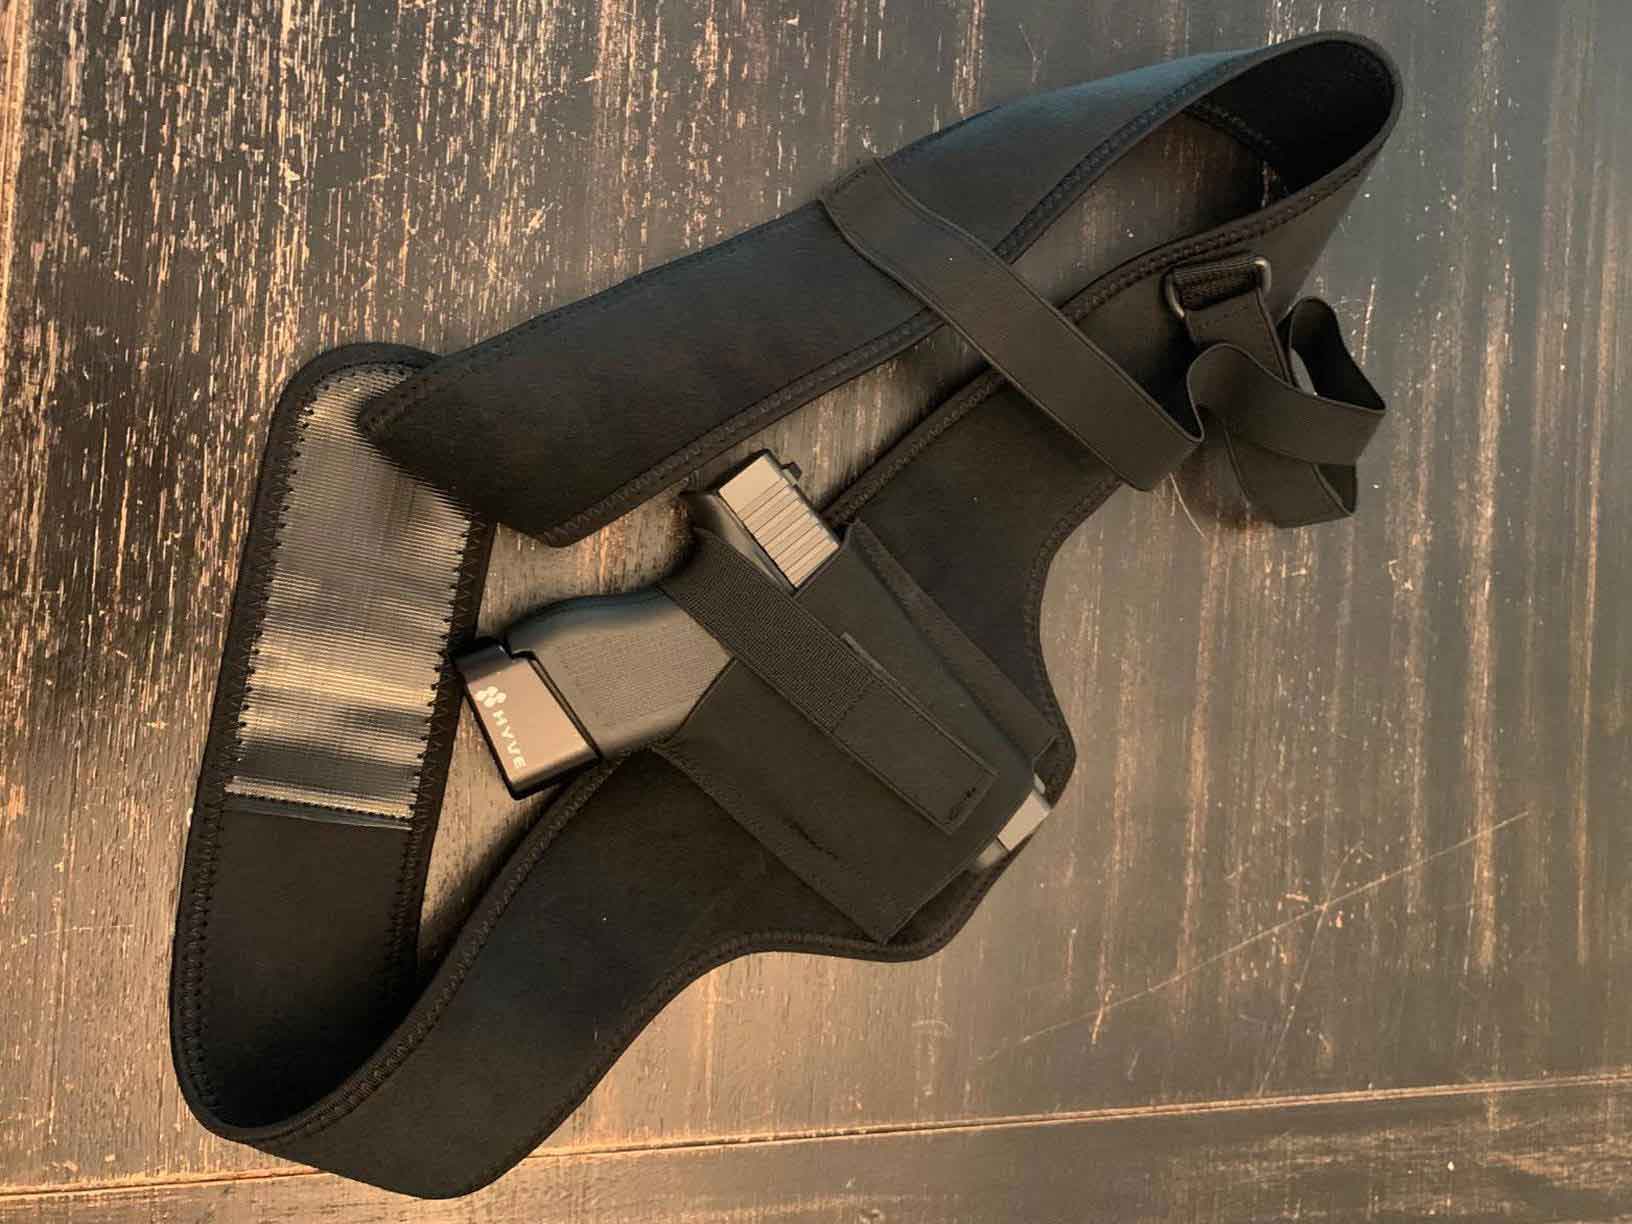  Dinosaurized | Praetorian shoulder & Belly holster |  100% concealed | Best holster for seated draw | 100% comfort | no smell | easy to use | Best holster for police officers | Best shoulder holster for farmers | Best shoulder holster for fathers | Best shoulder holster for dads | Best shoulder holster for ladies | Best shoulder holster for car owners | Best shoulder holster for Uber driver| Best shoulder holsters | police shoulder holster||shoulder holster revolver | shoulder holster for revolver | shoulder holster for concealed carry | shoulder gun holster | Best holster for drivers | best women's shoulder holster | shoulder holster concealed carry | shoulder carry holster